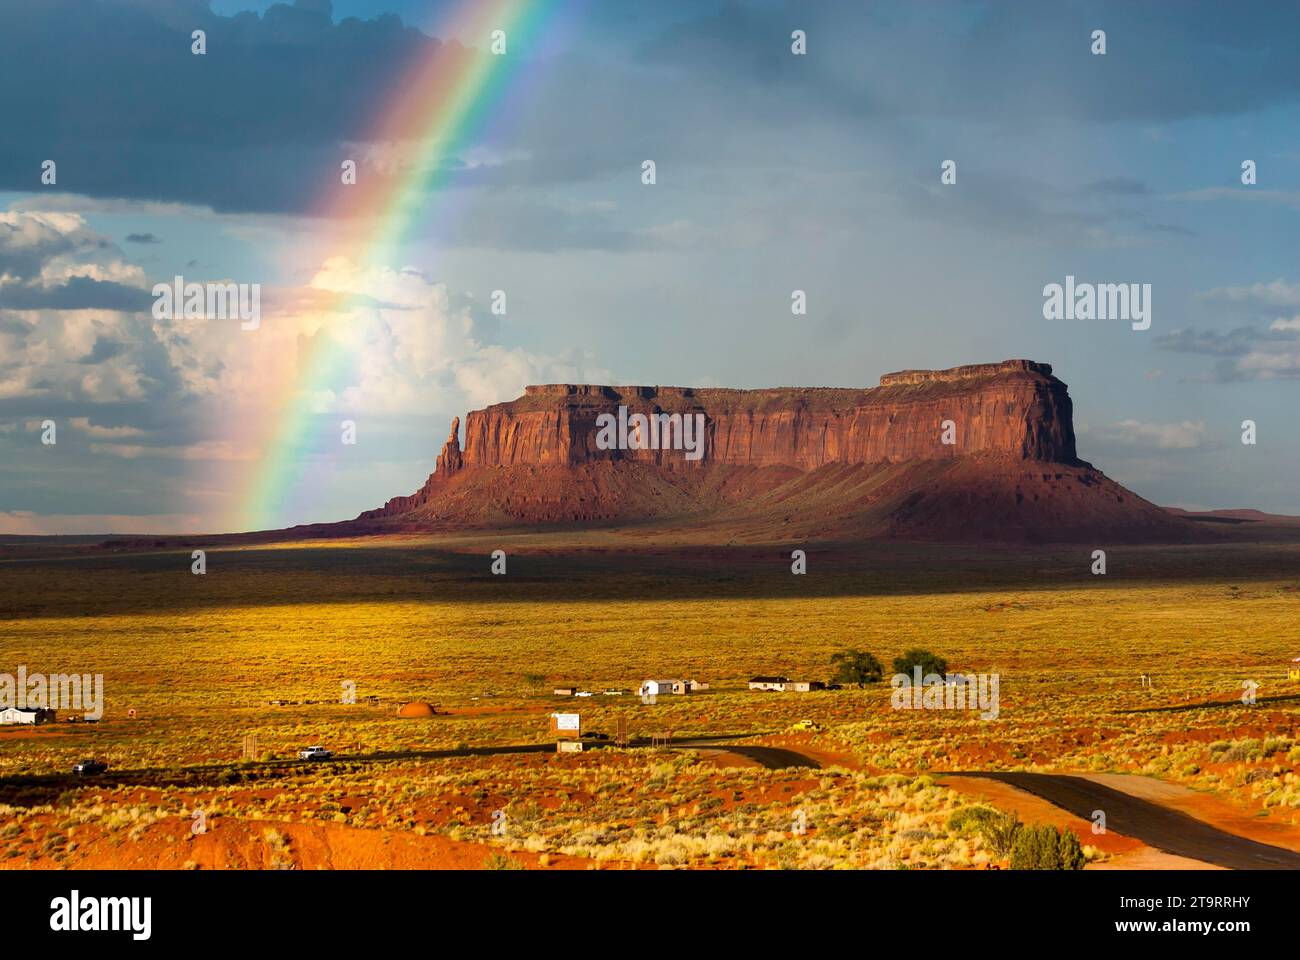 Arcobaleno a Monument Valley, cielo nuvoloso, nuvola, cielo, ovest, ovest, Utah, USA, Nord America Foto Stock